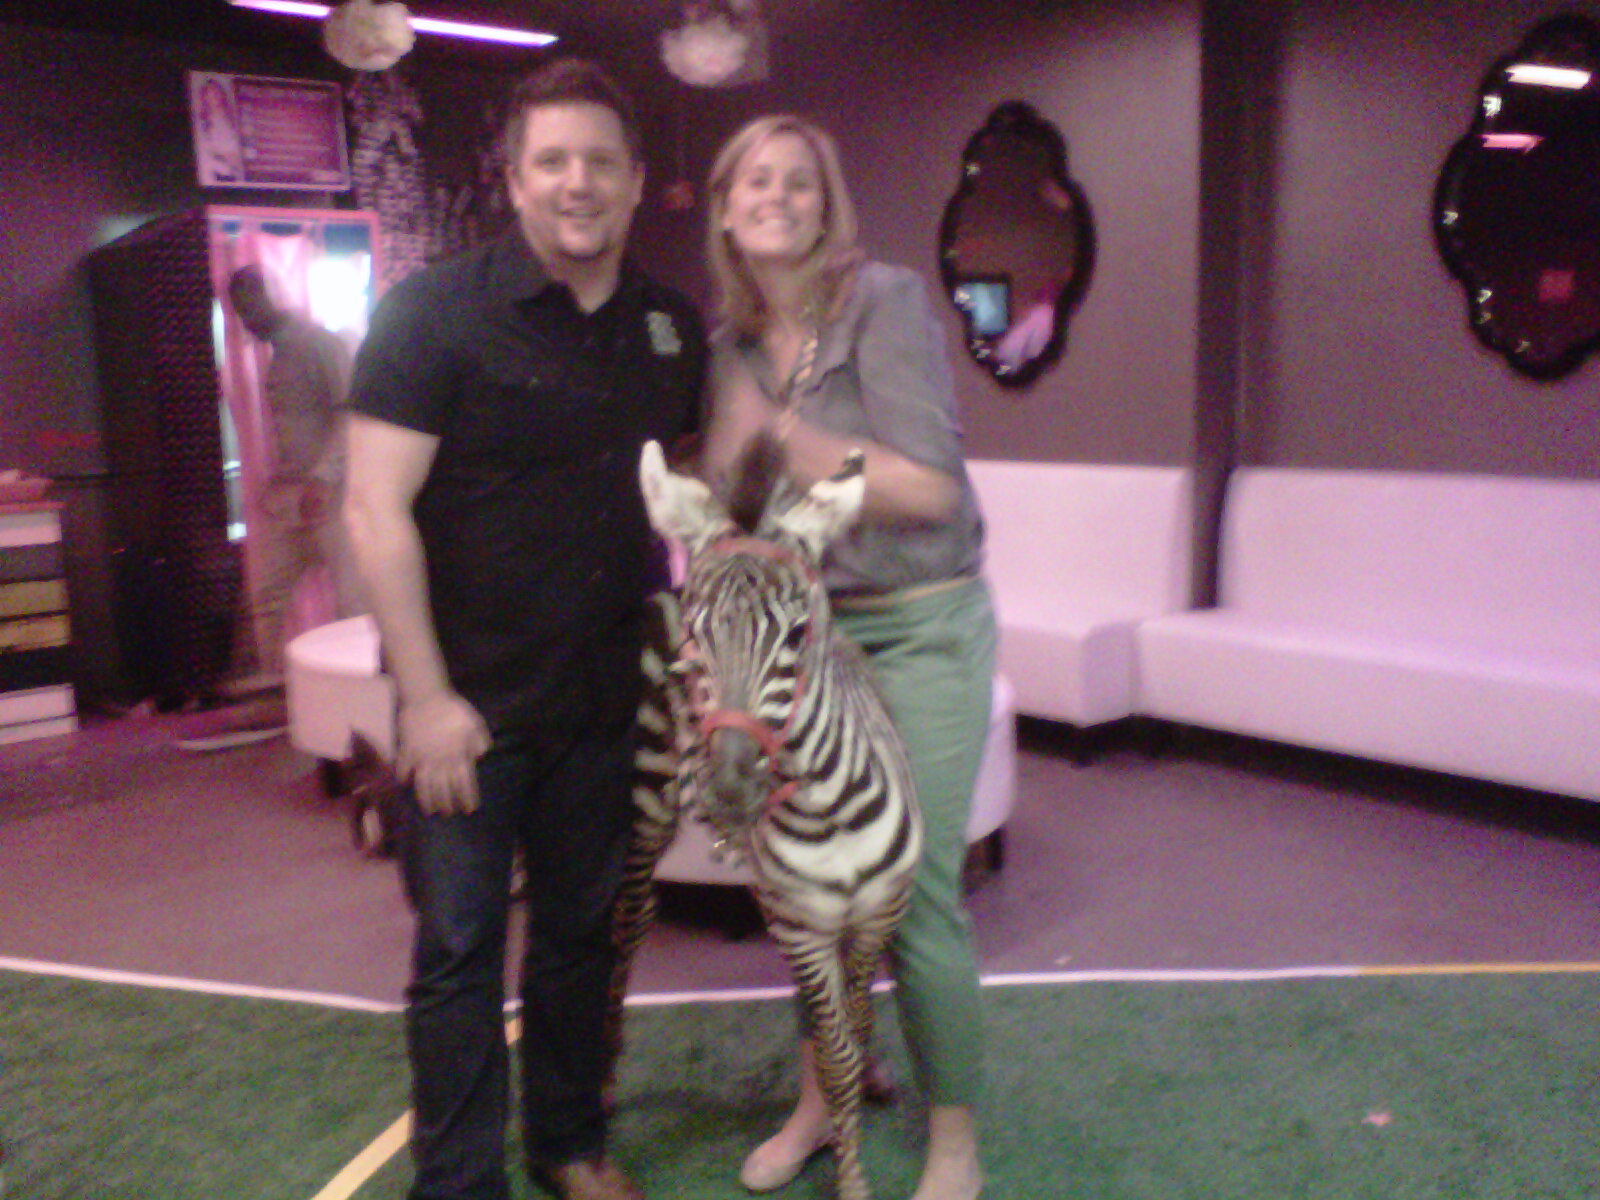 Backstage at the Wendy Williams Show with a zebra.